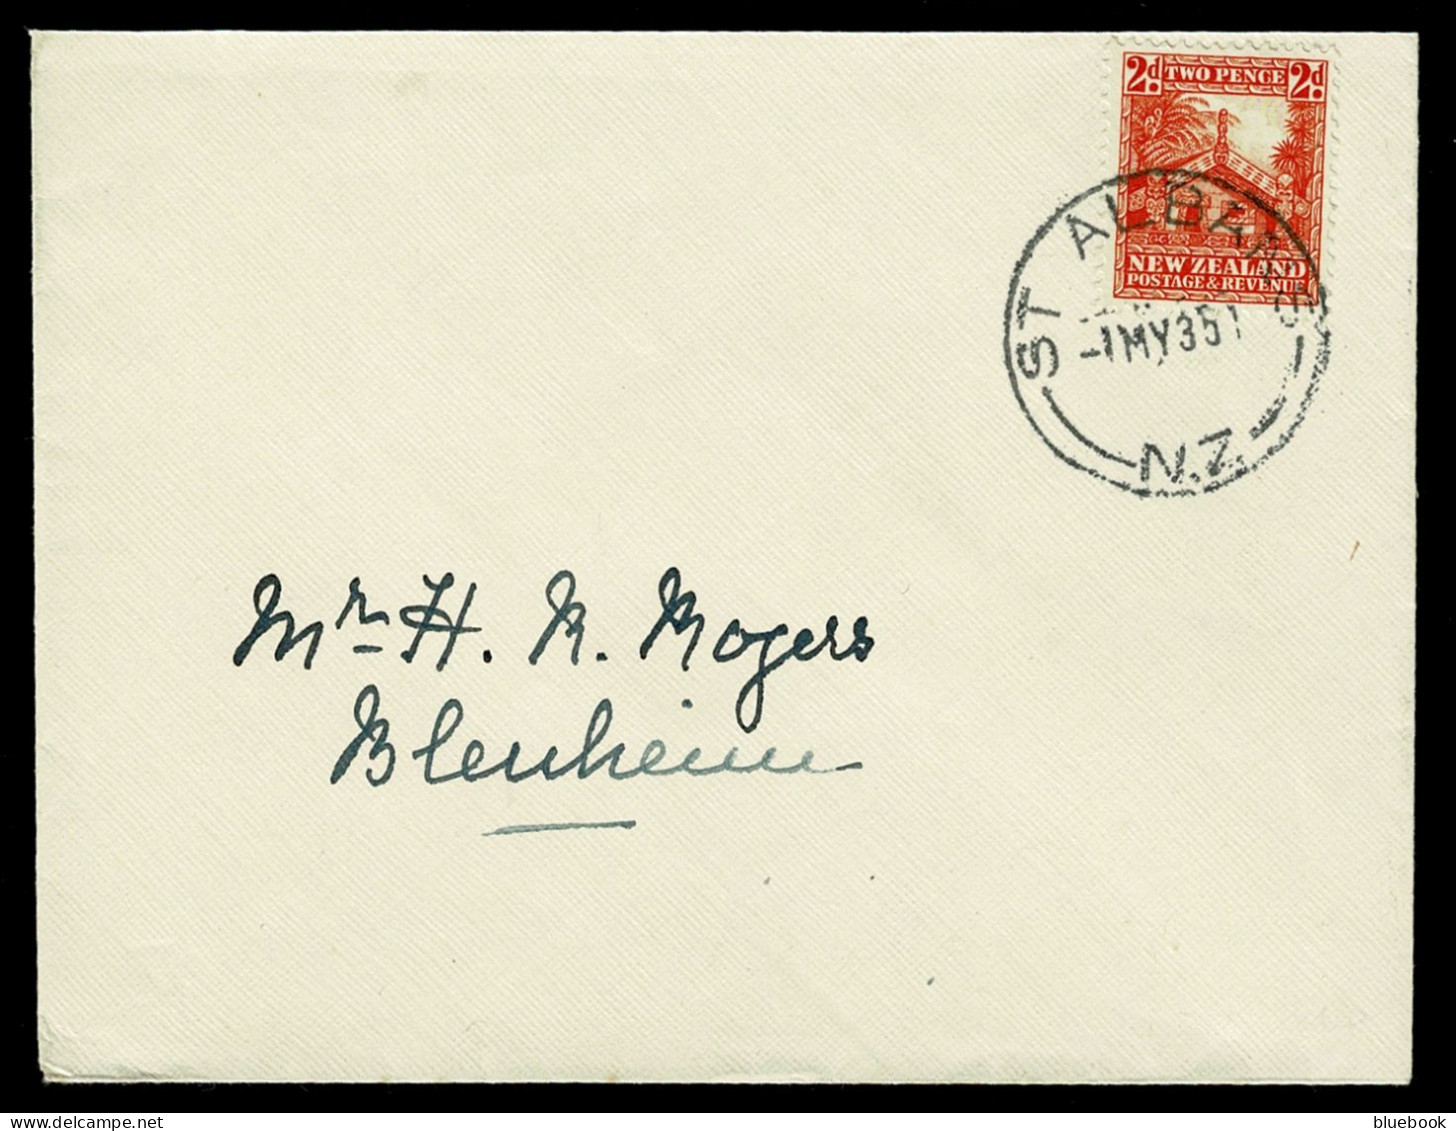 Ref 1644 - 1935 New Zealand Cover - St Albans 2d Rate To Blenheim - Super Postmark - Covers & Documents